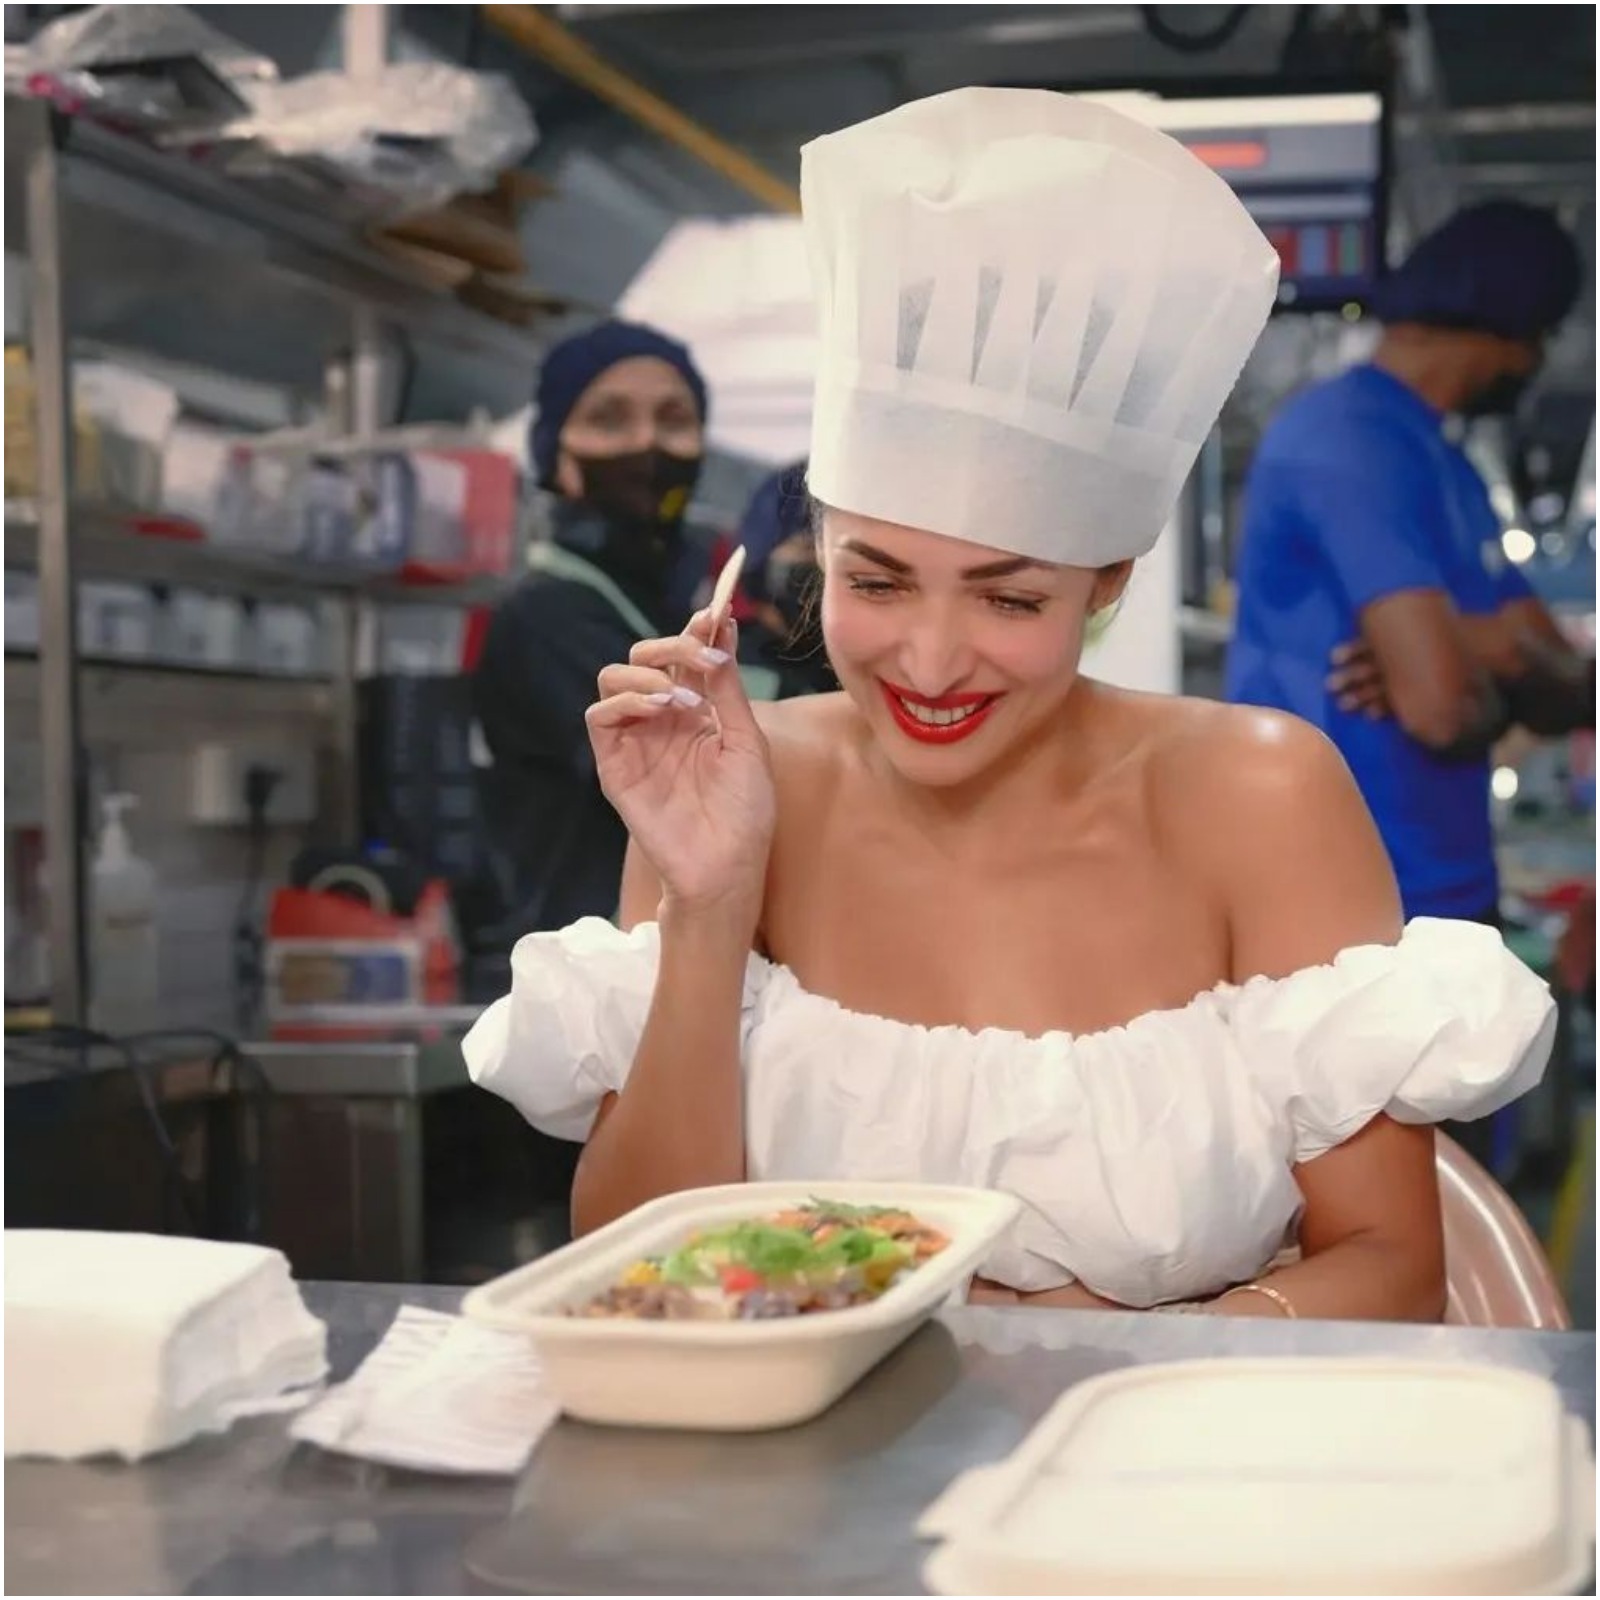 Malaika Arora seen donning the chef's hat while visiting her restaurant.